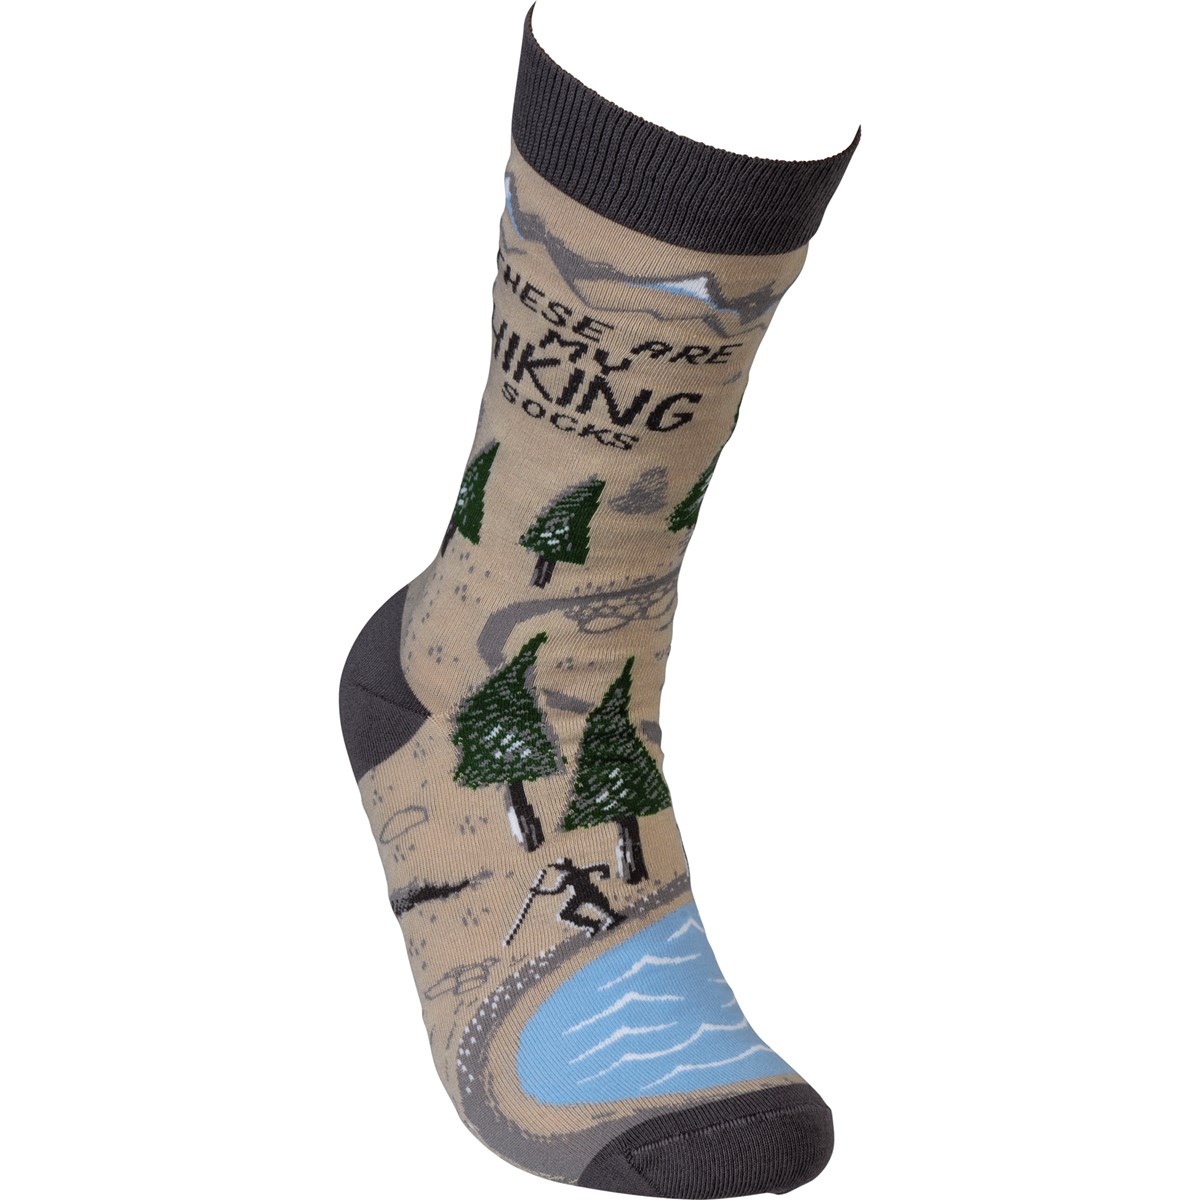 Socks - These Are My Hiking Socks - One Size Fits Most - Cotton, Nylon, Spandex